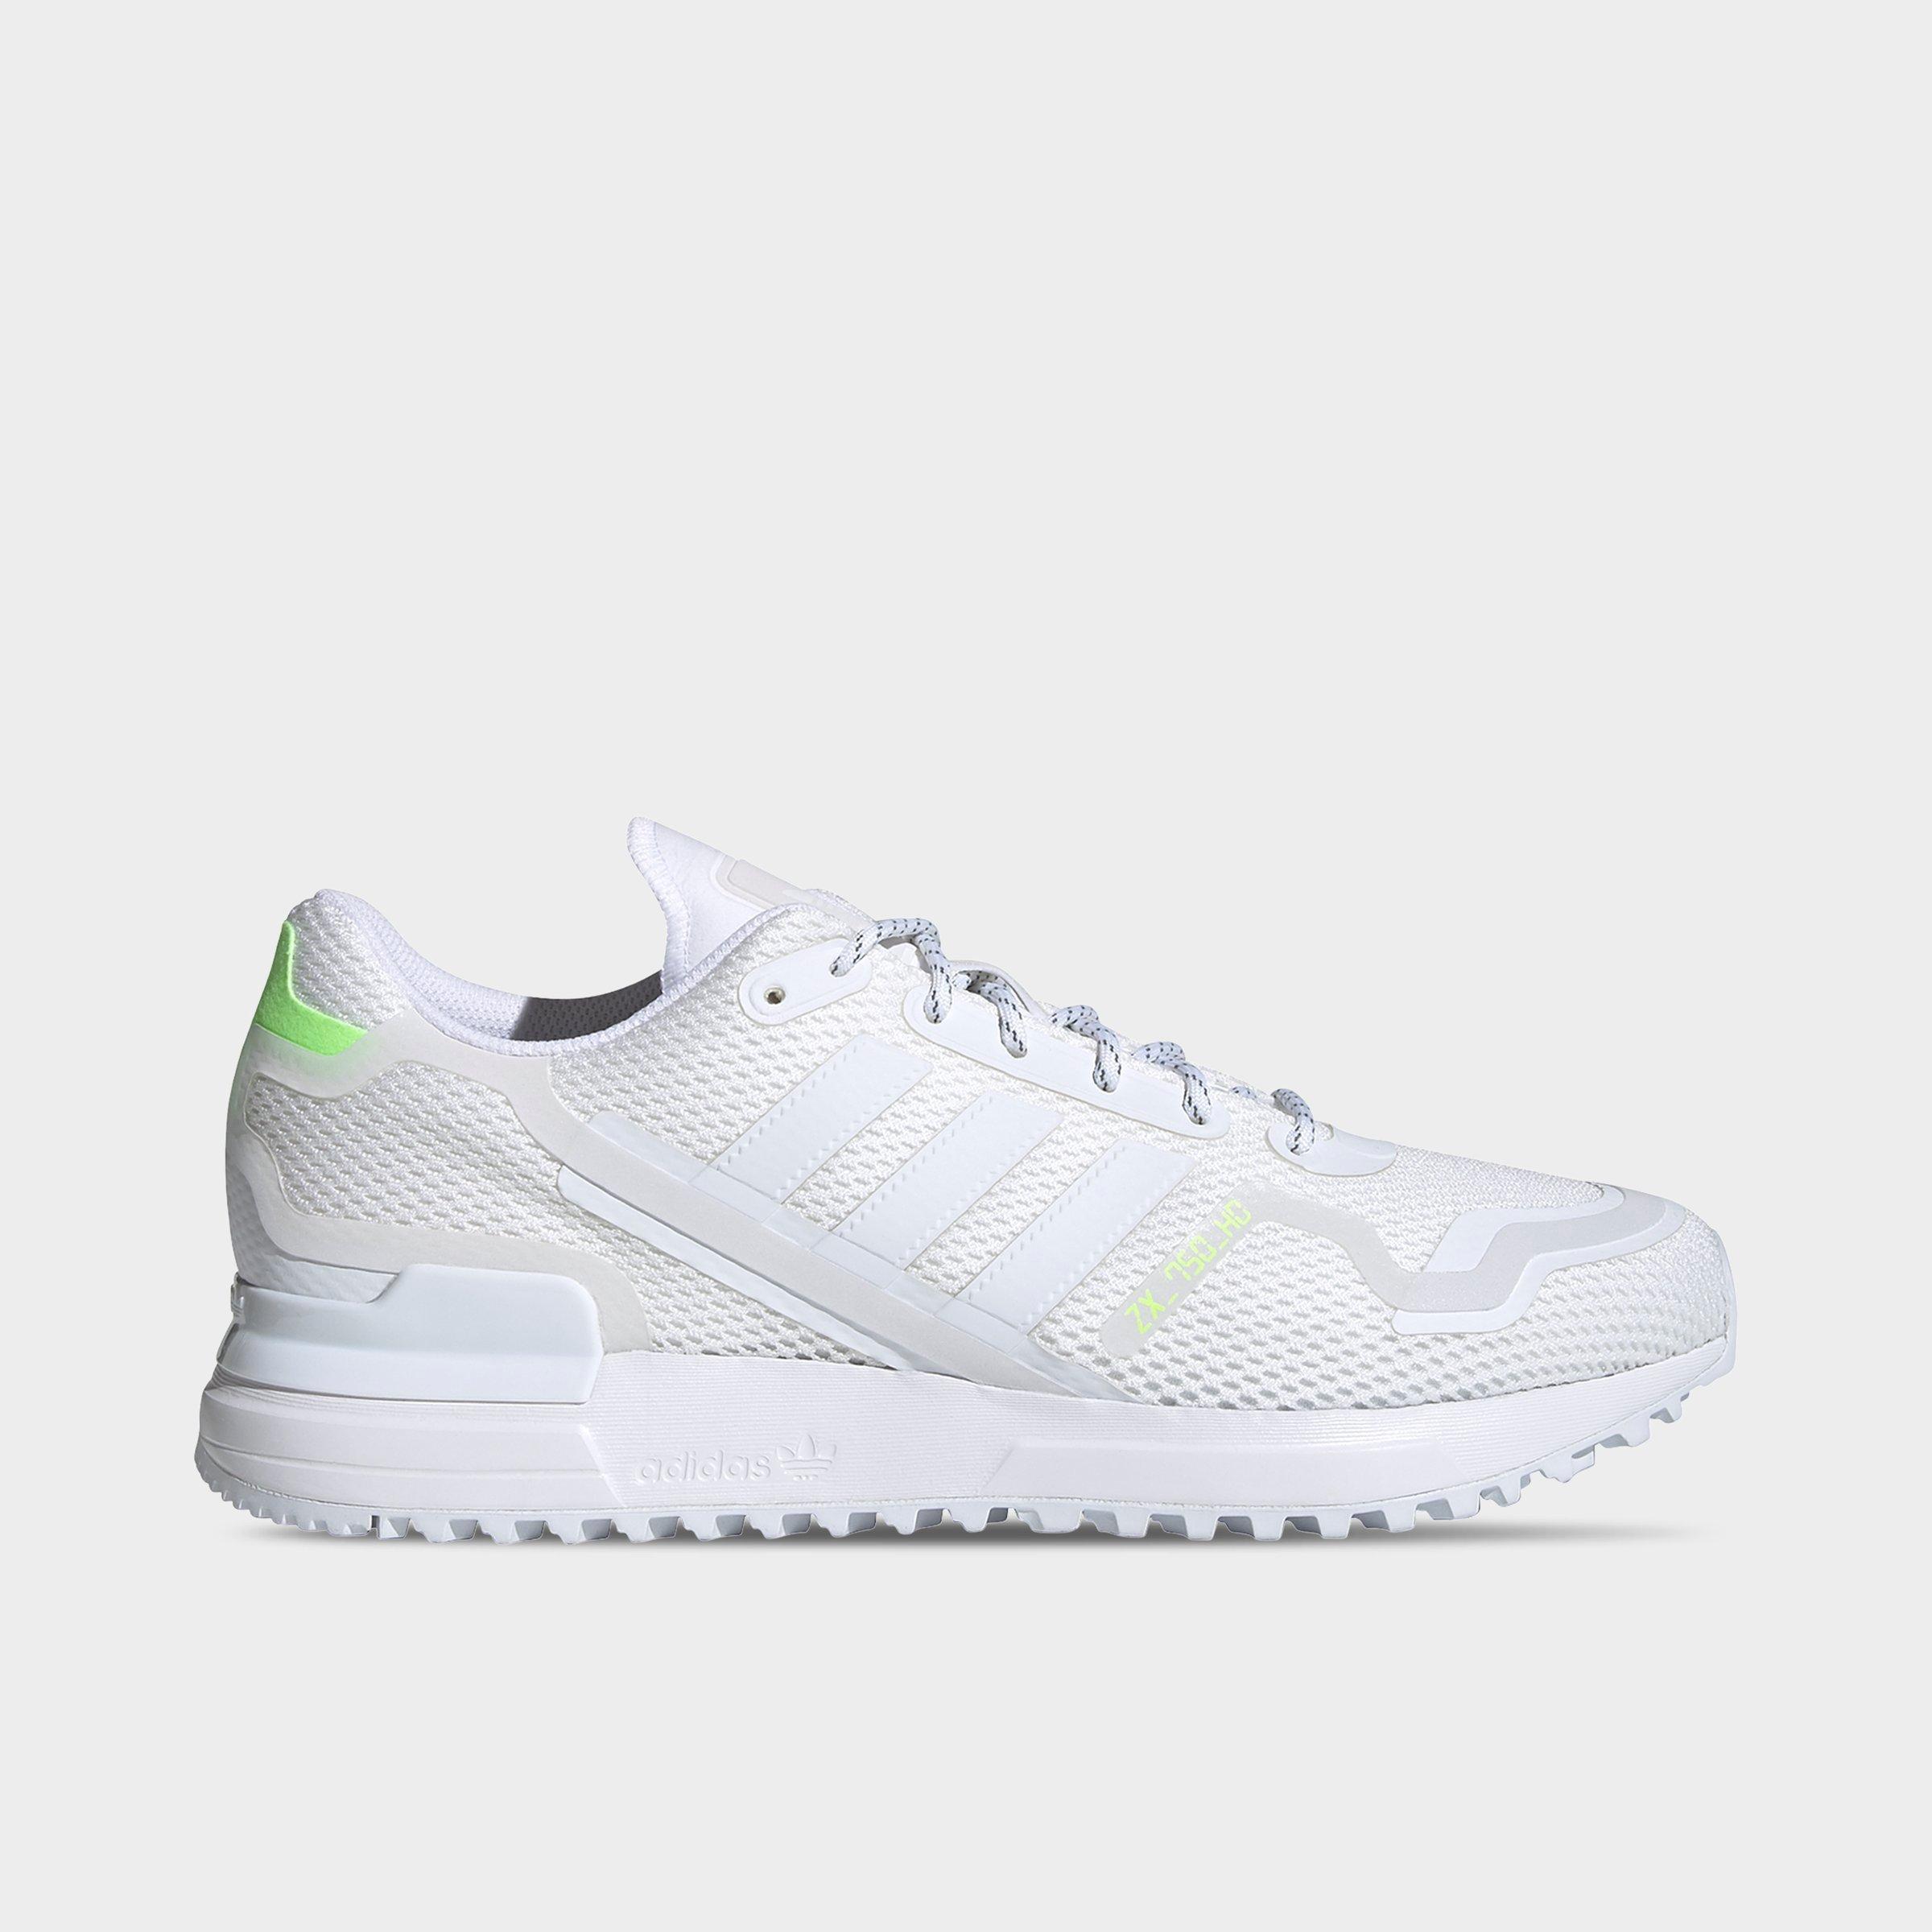 adidas zx 750 white leather